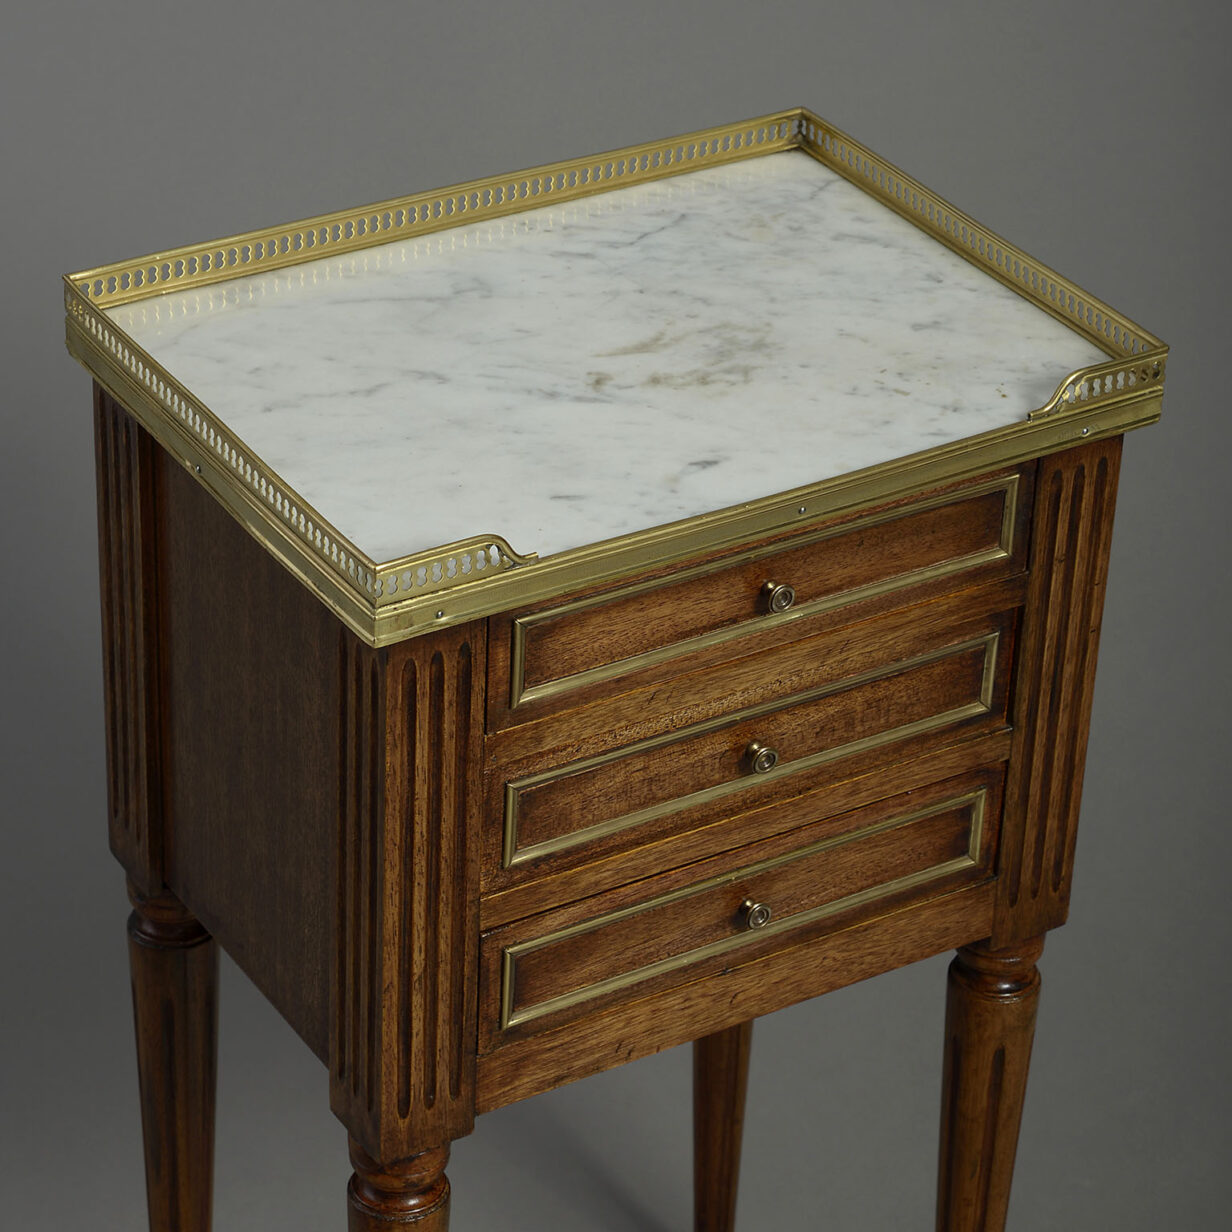 Brass Mounted Mahogany Bedside Cabinet in the Louis XVI Manner